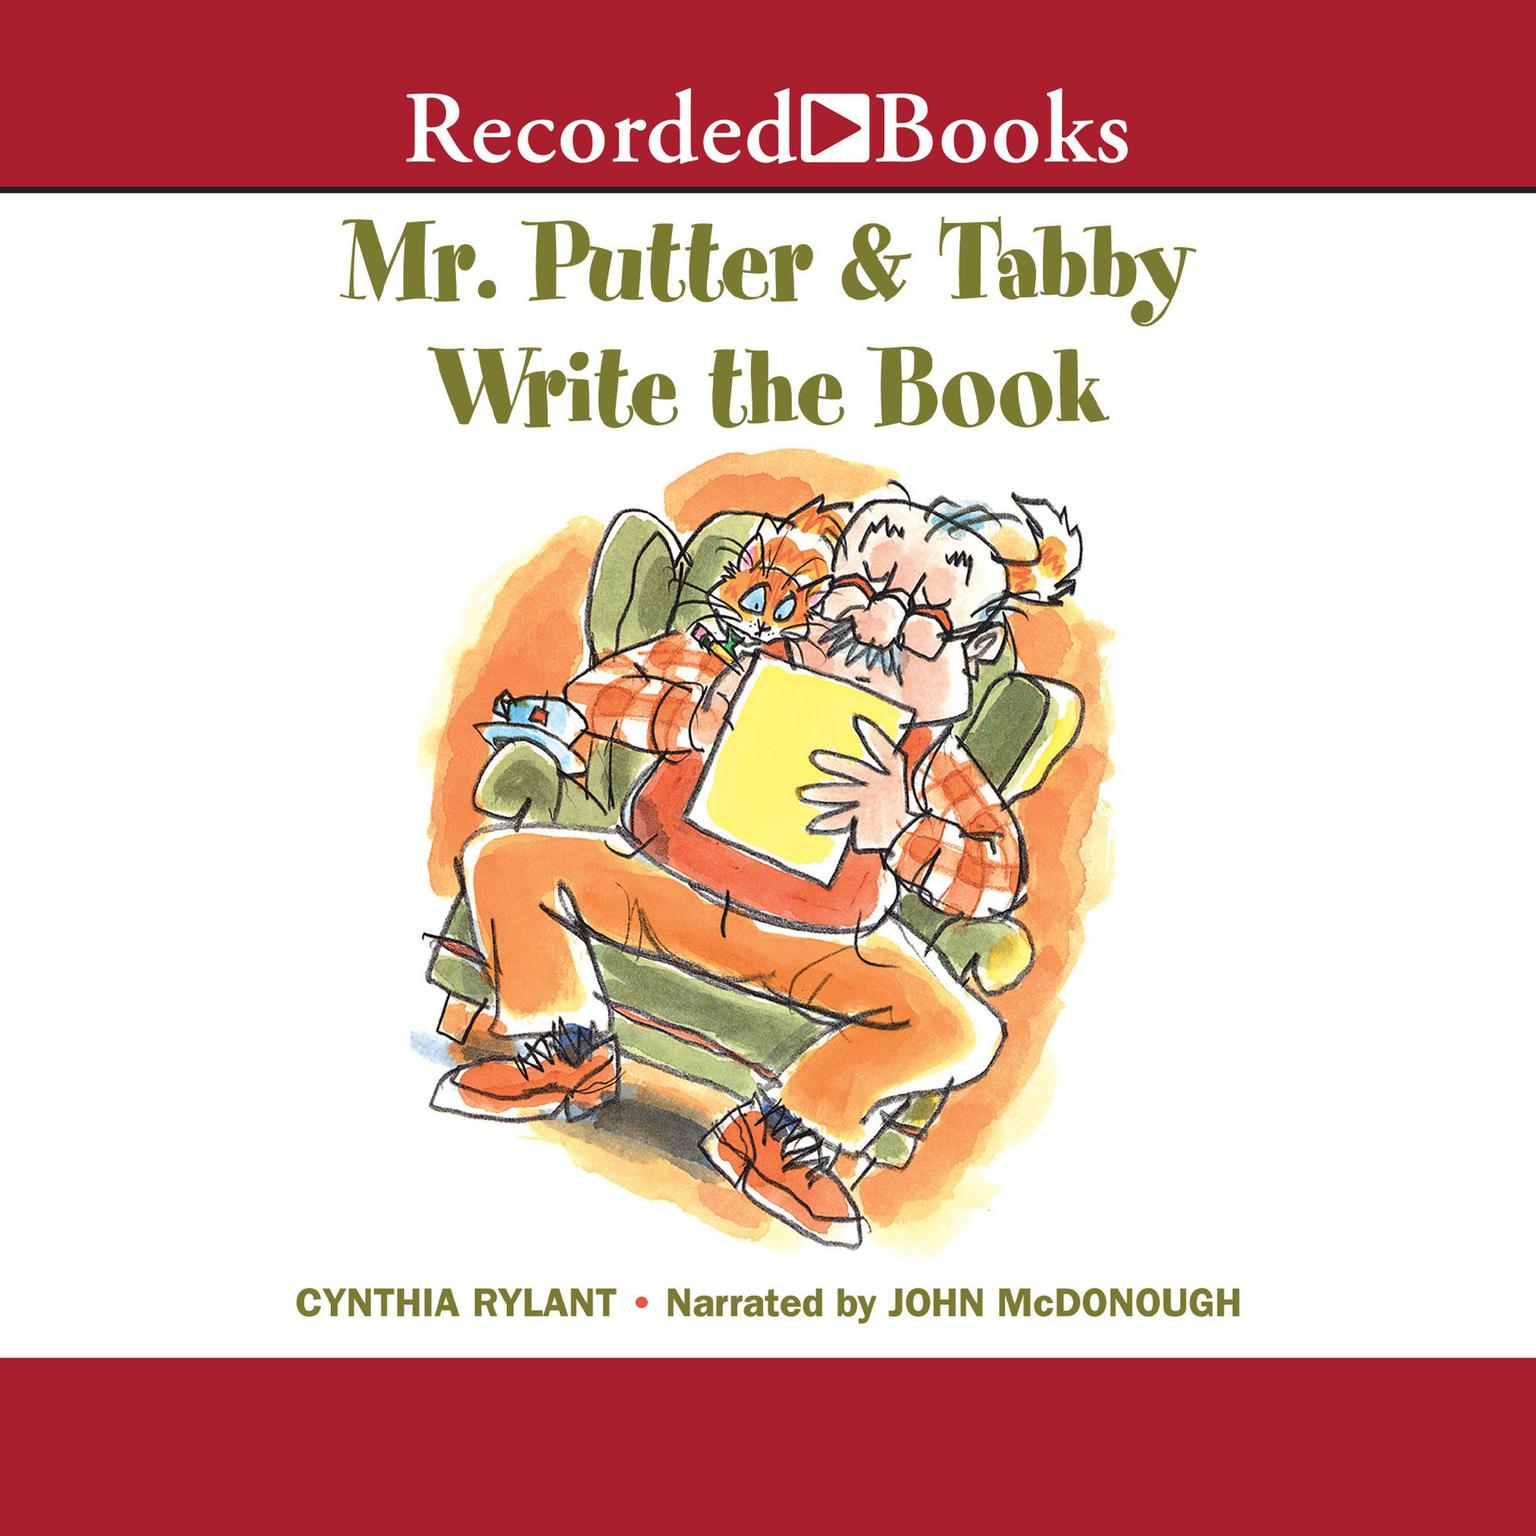 Mr. Putter & Tabby Write the Book Audiobook, by Cynthia Rylant